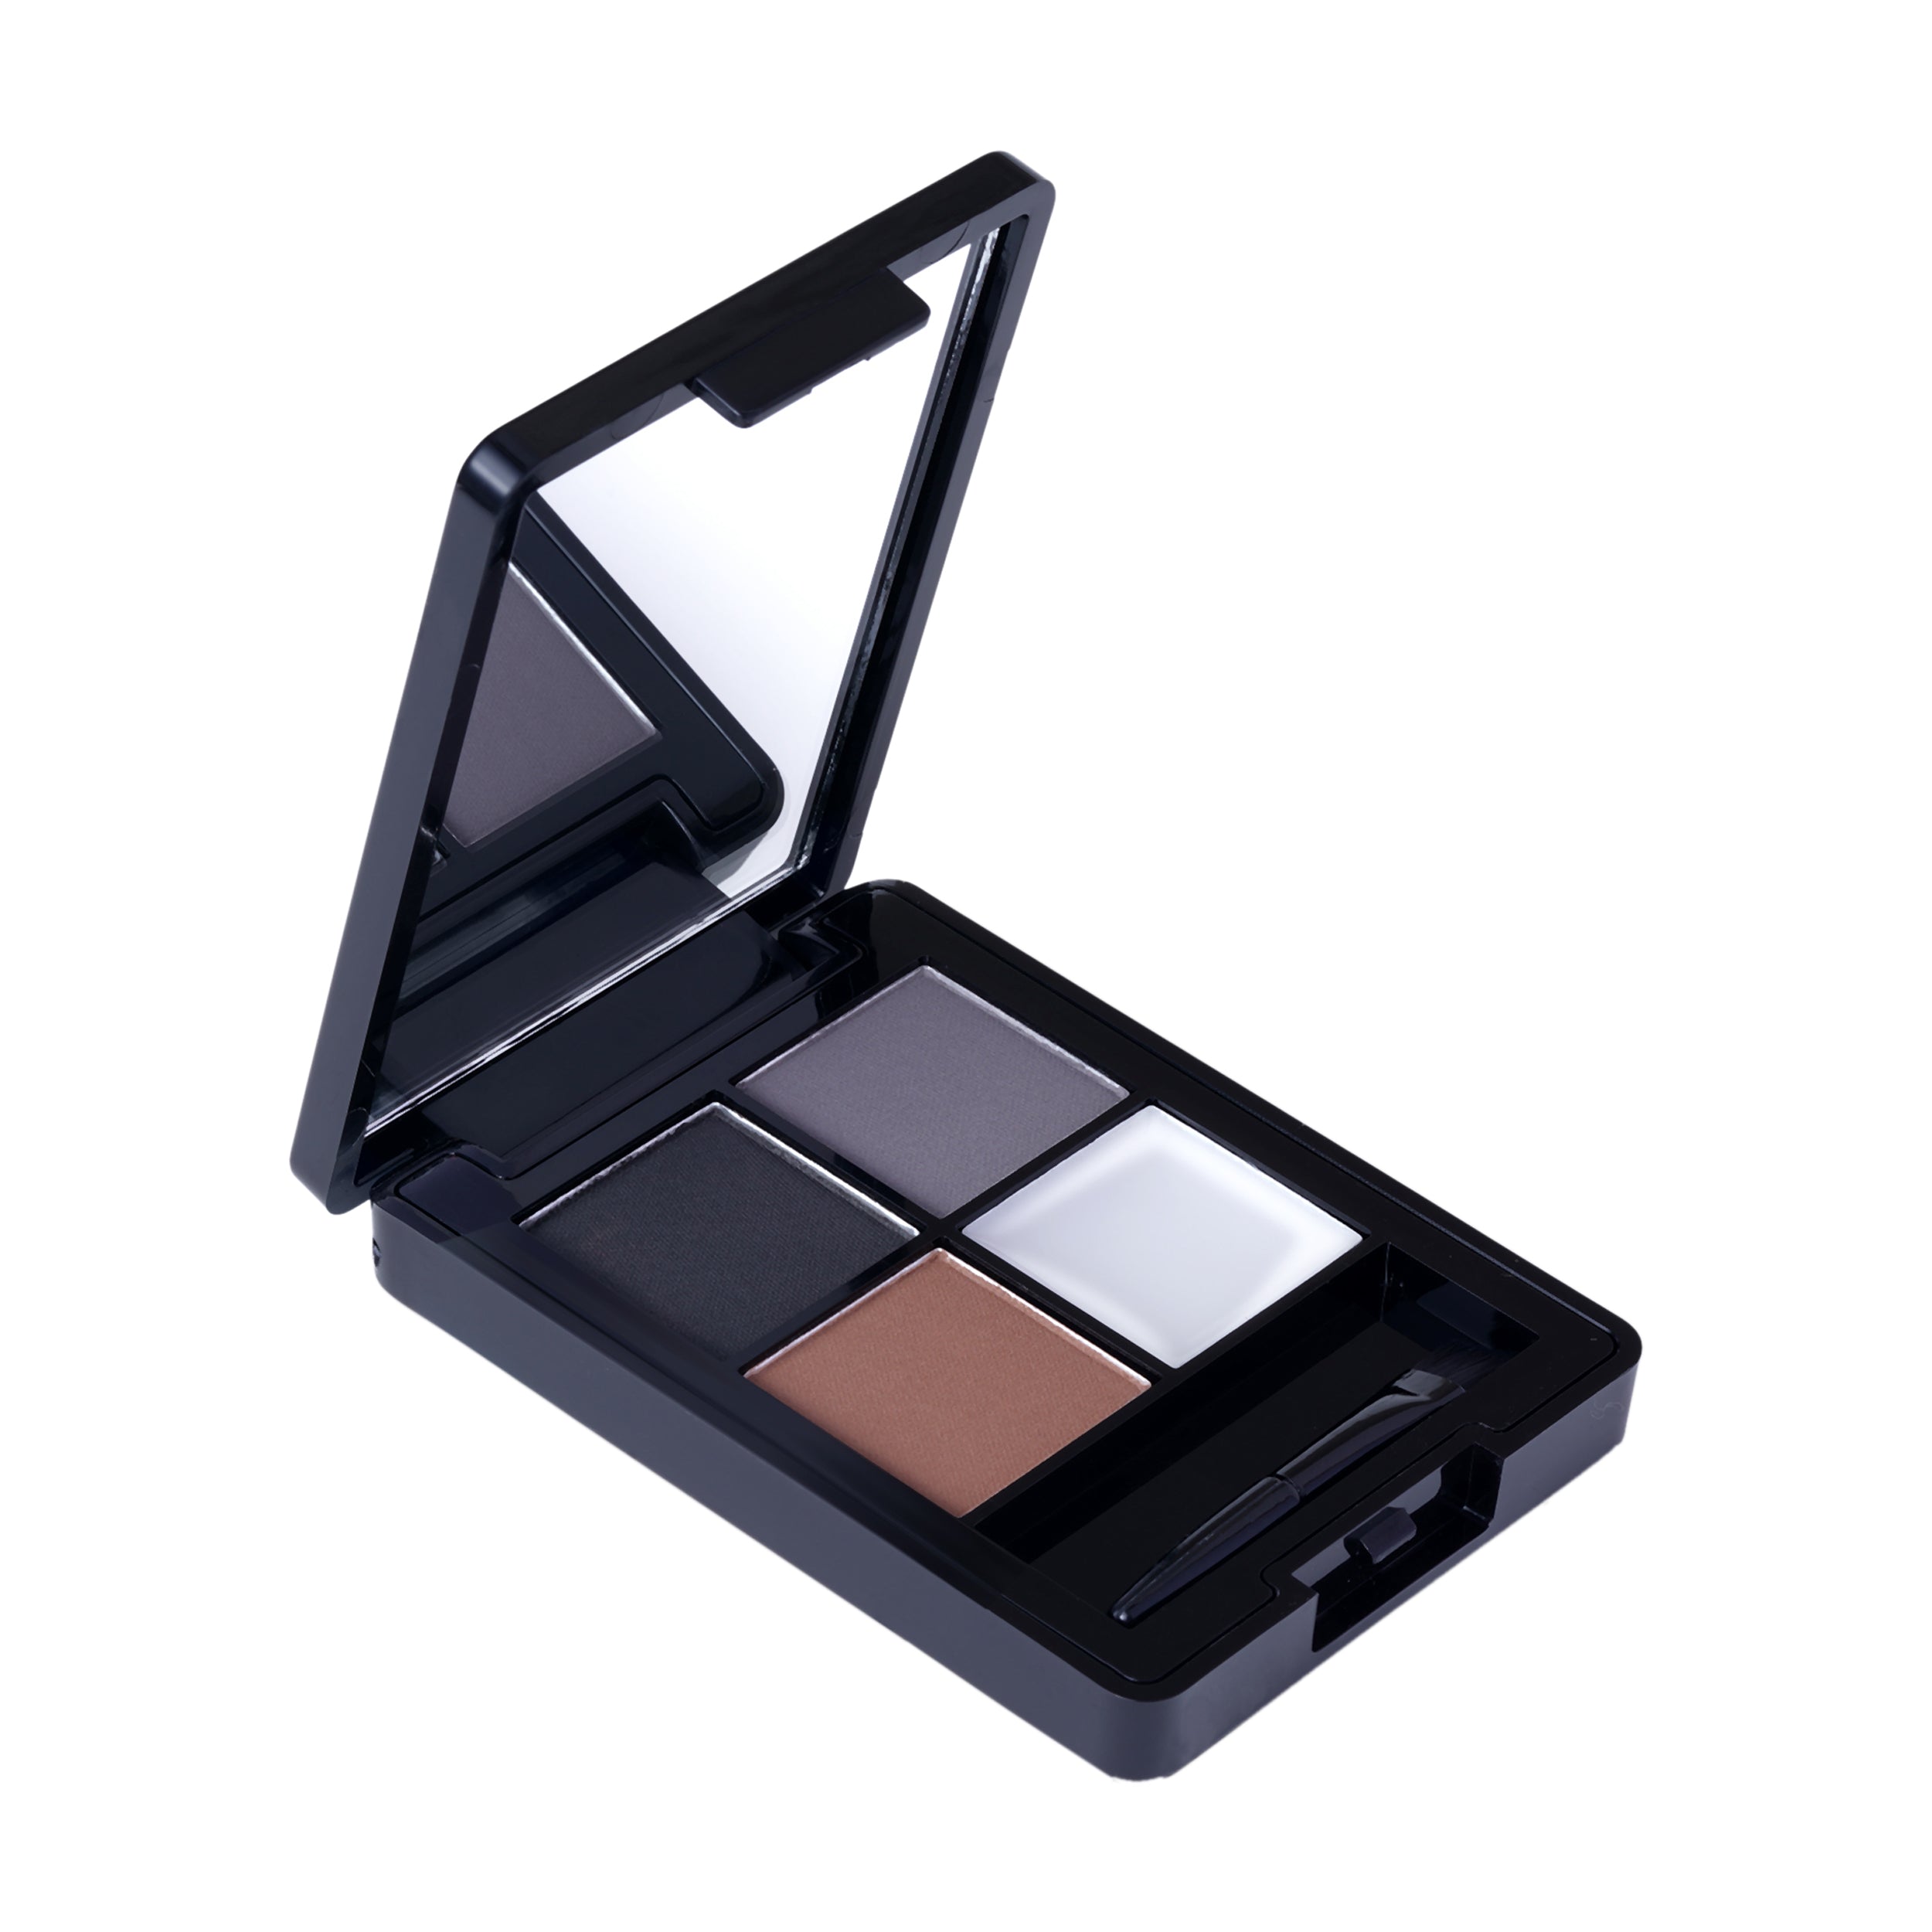 Glam21 4-in-1 Eyebrow Palette Micro Pigments, Smudge Proof, Longlasting Eye Make-up Kit 9 g (MYSTERIOUS)